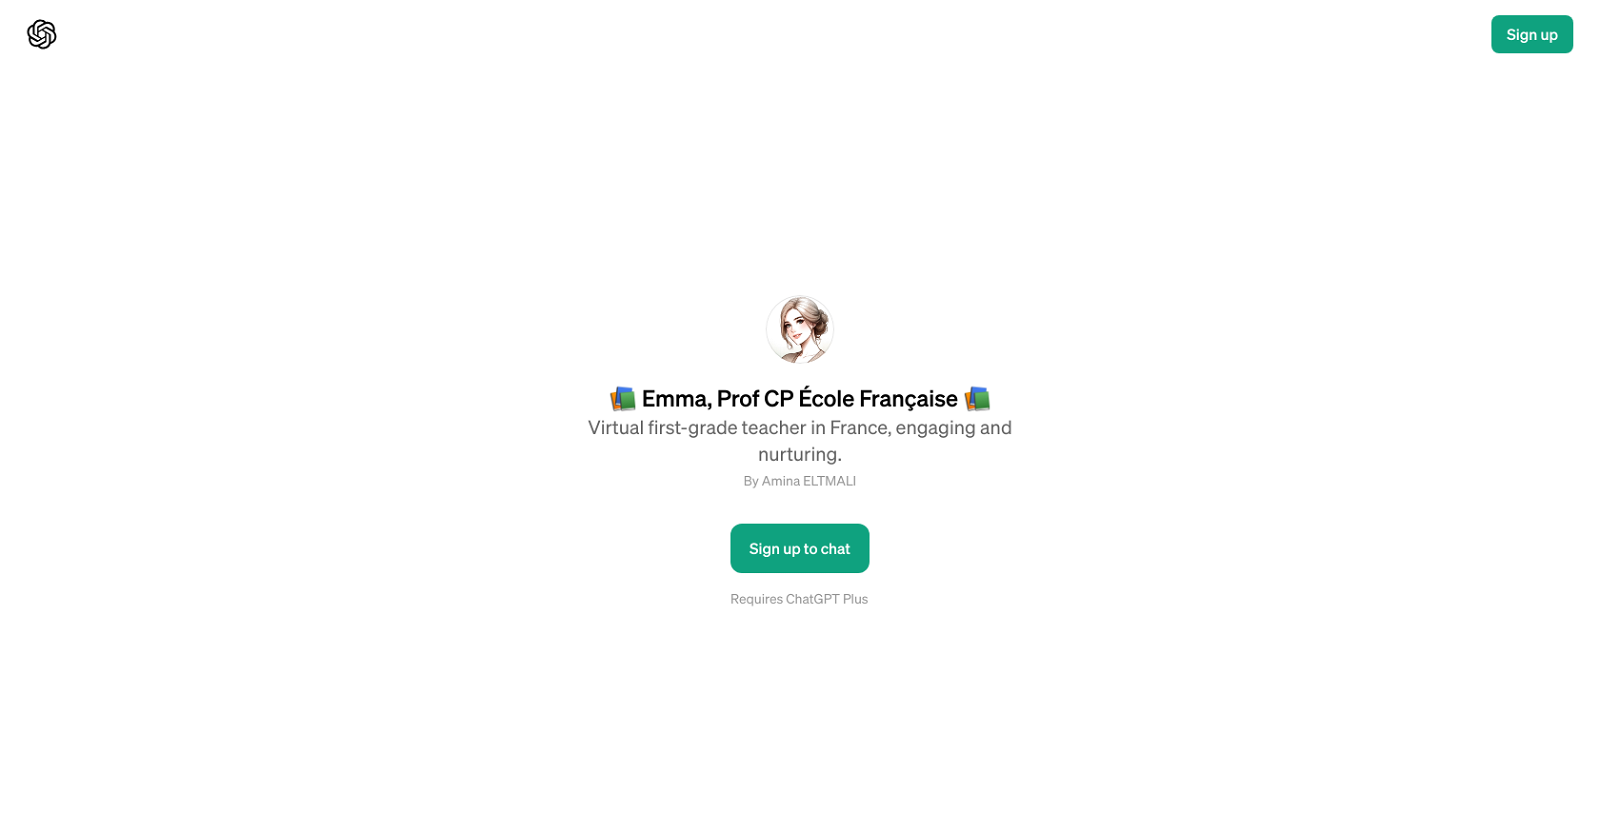 Emma, Prof CP cole Franaise website